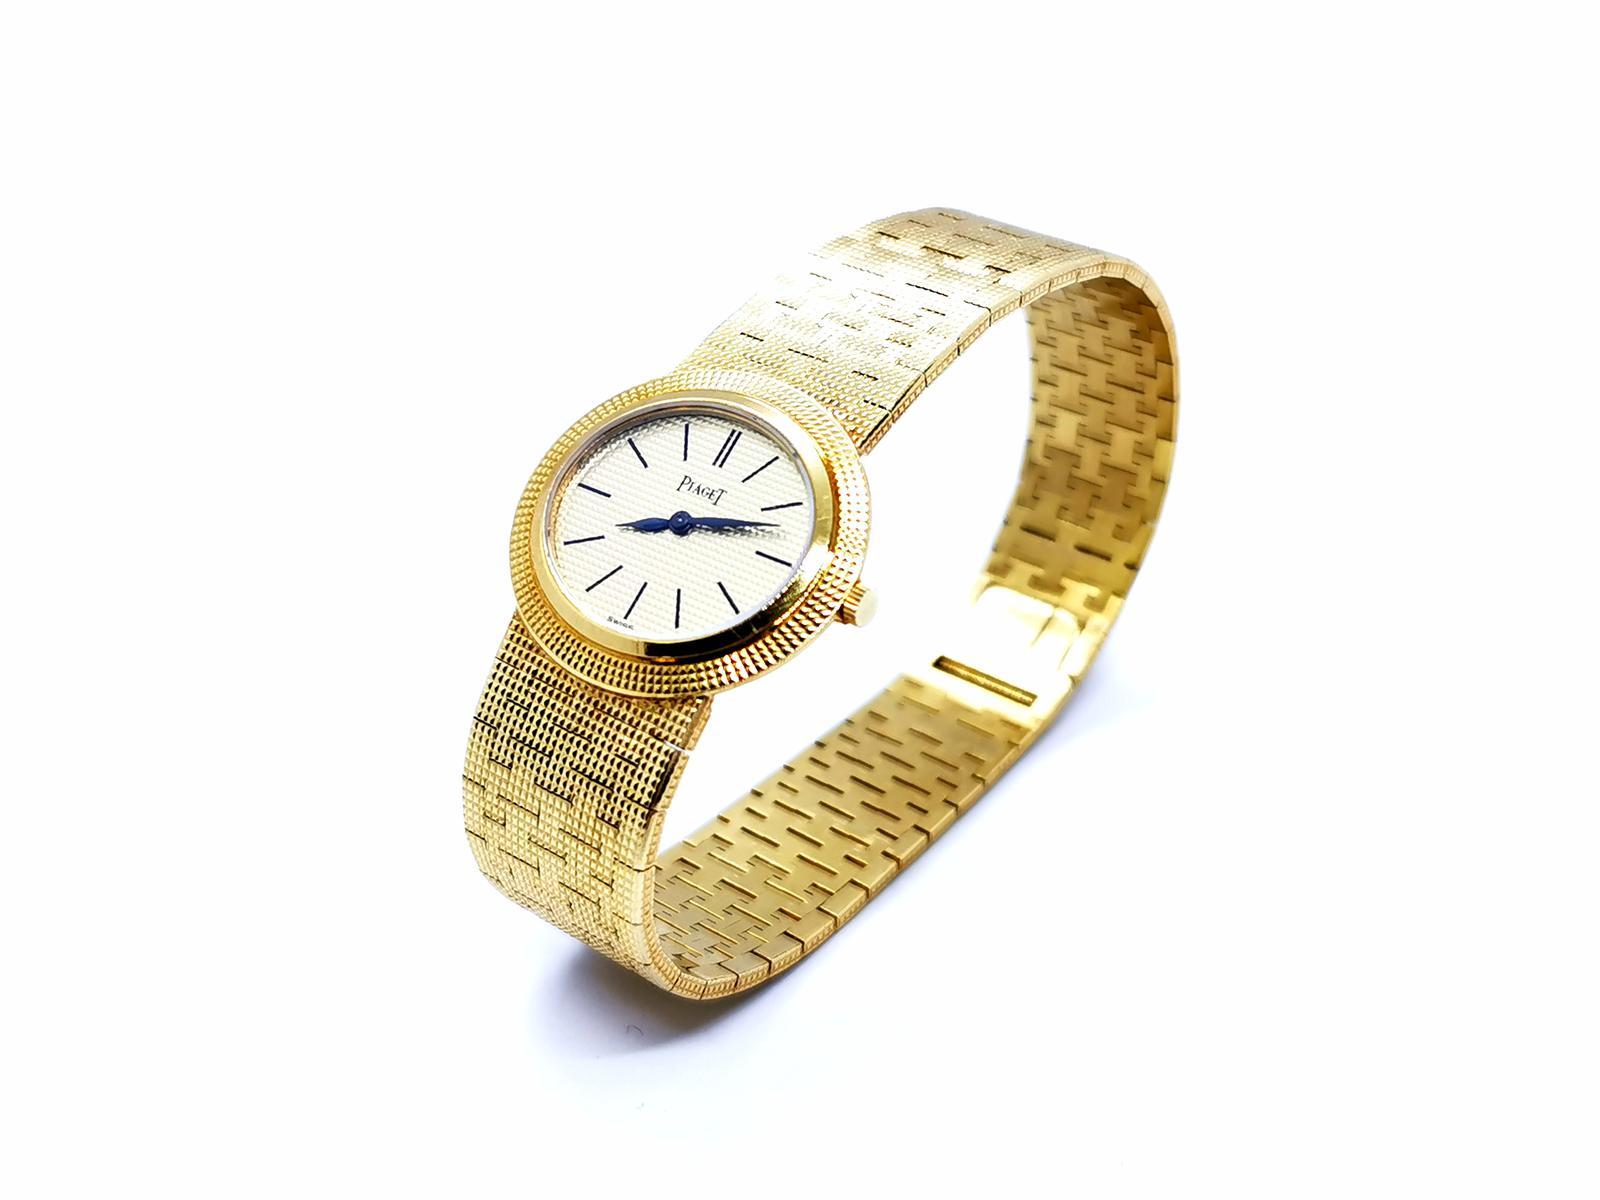 Women watches signed by Piaget. yellow gold 750 thousandths. oval case. mechanical movement. housing dimensions: 26.8 mm x 24 mm. strap length: 18.5 cm. strap width front: 1.68 cm at the rear strap width: 1.38 cm. sapphire. revised perfect operating